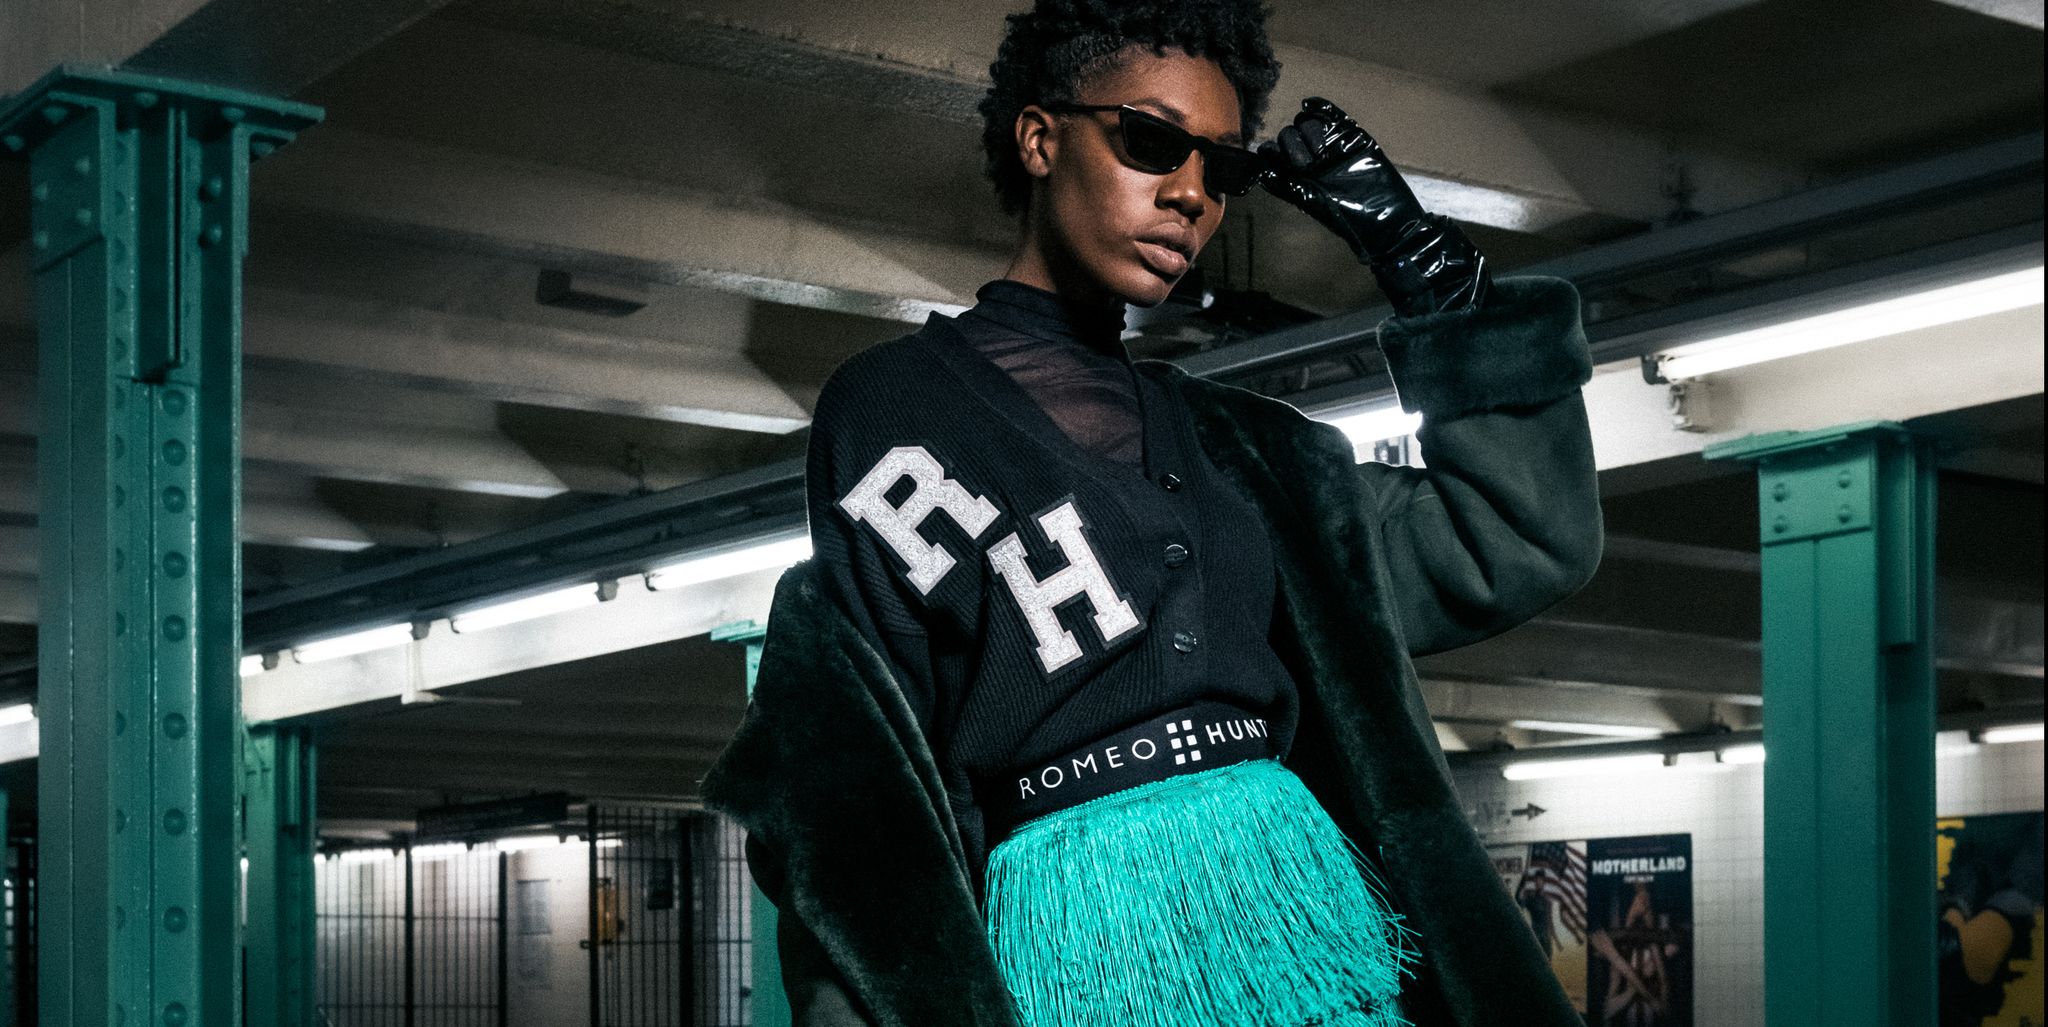 ensemble from romeo hunte's fallwinter 2021 collection